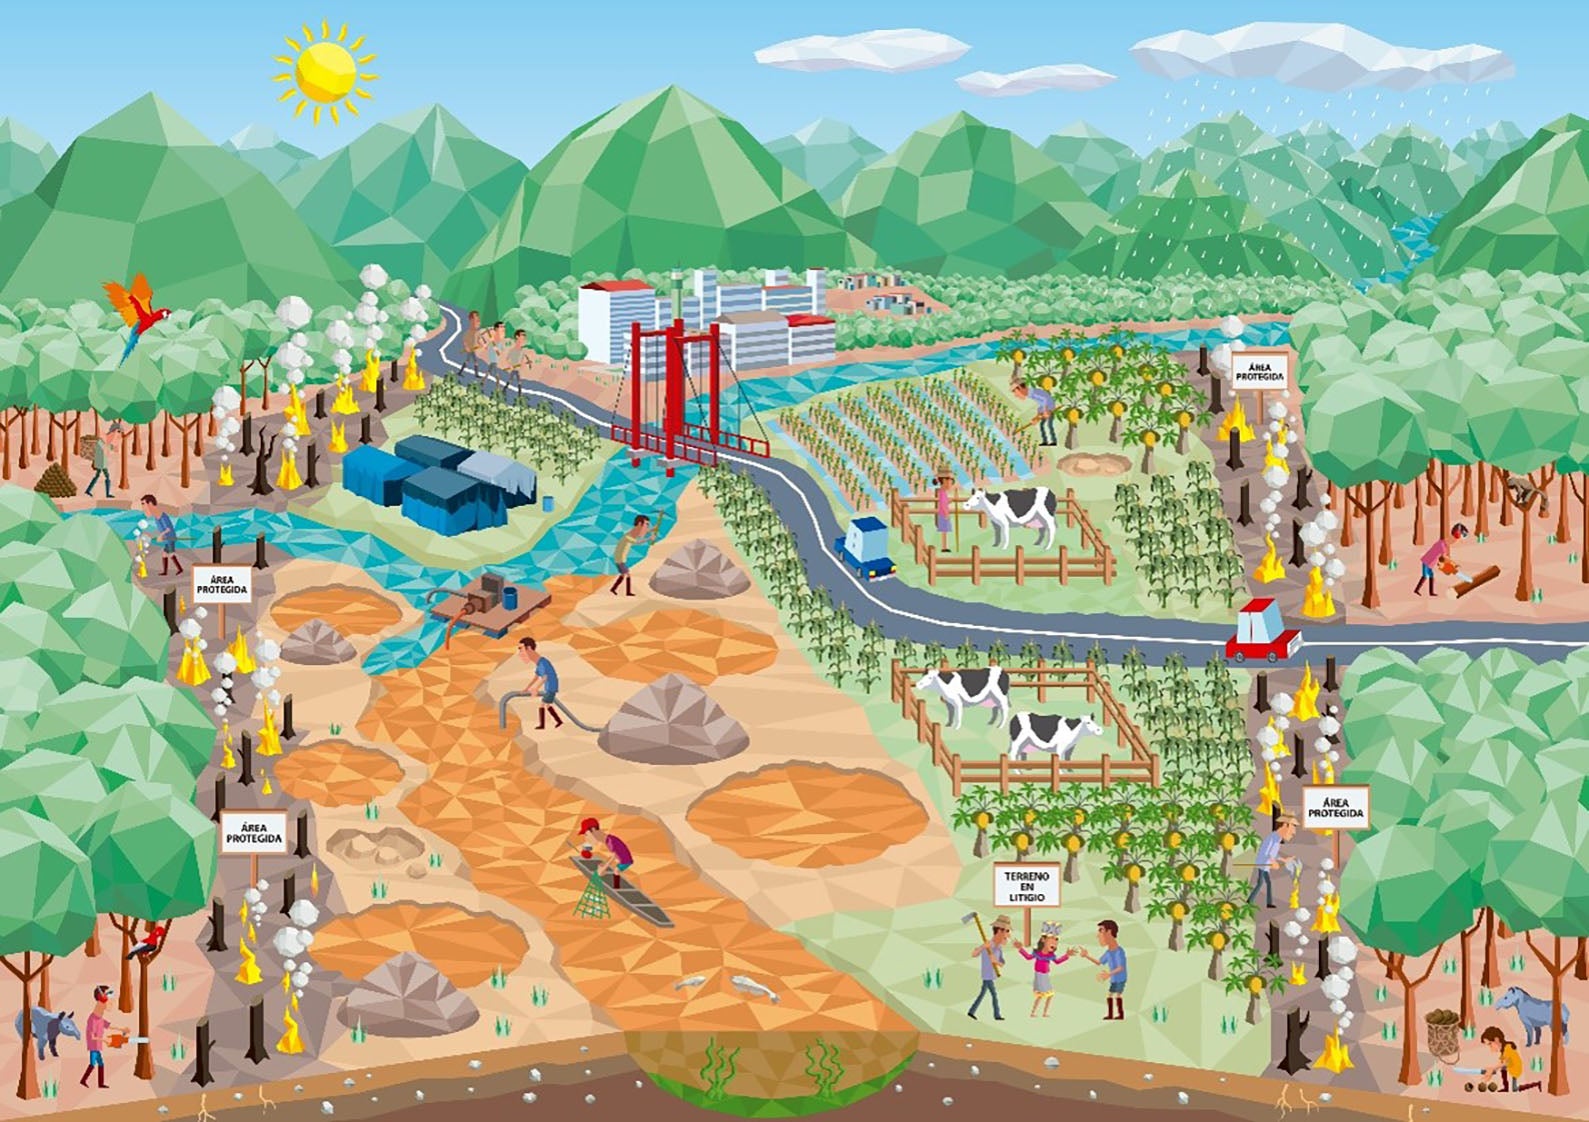 An illustration of a river, forest, mountains, farms and communities in Madre de Dios Peru that illustrates the area's future without a land use plan in place